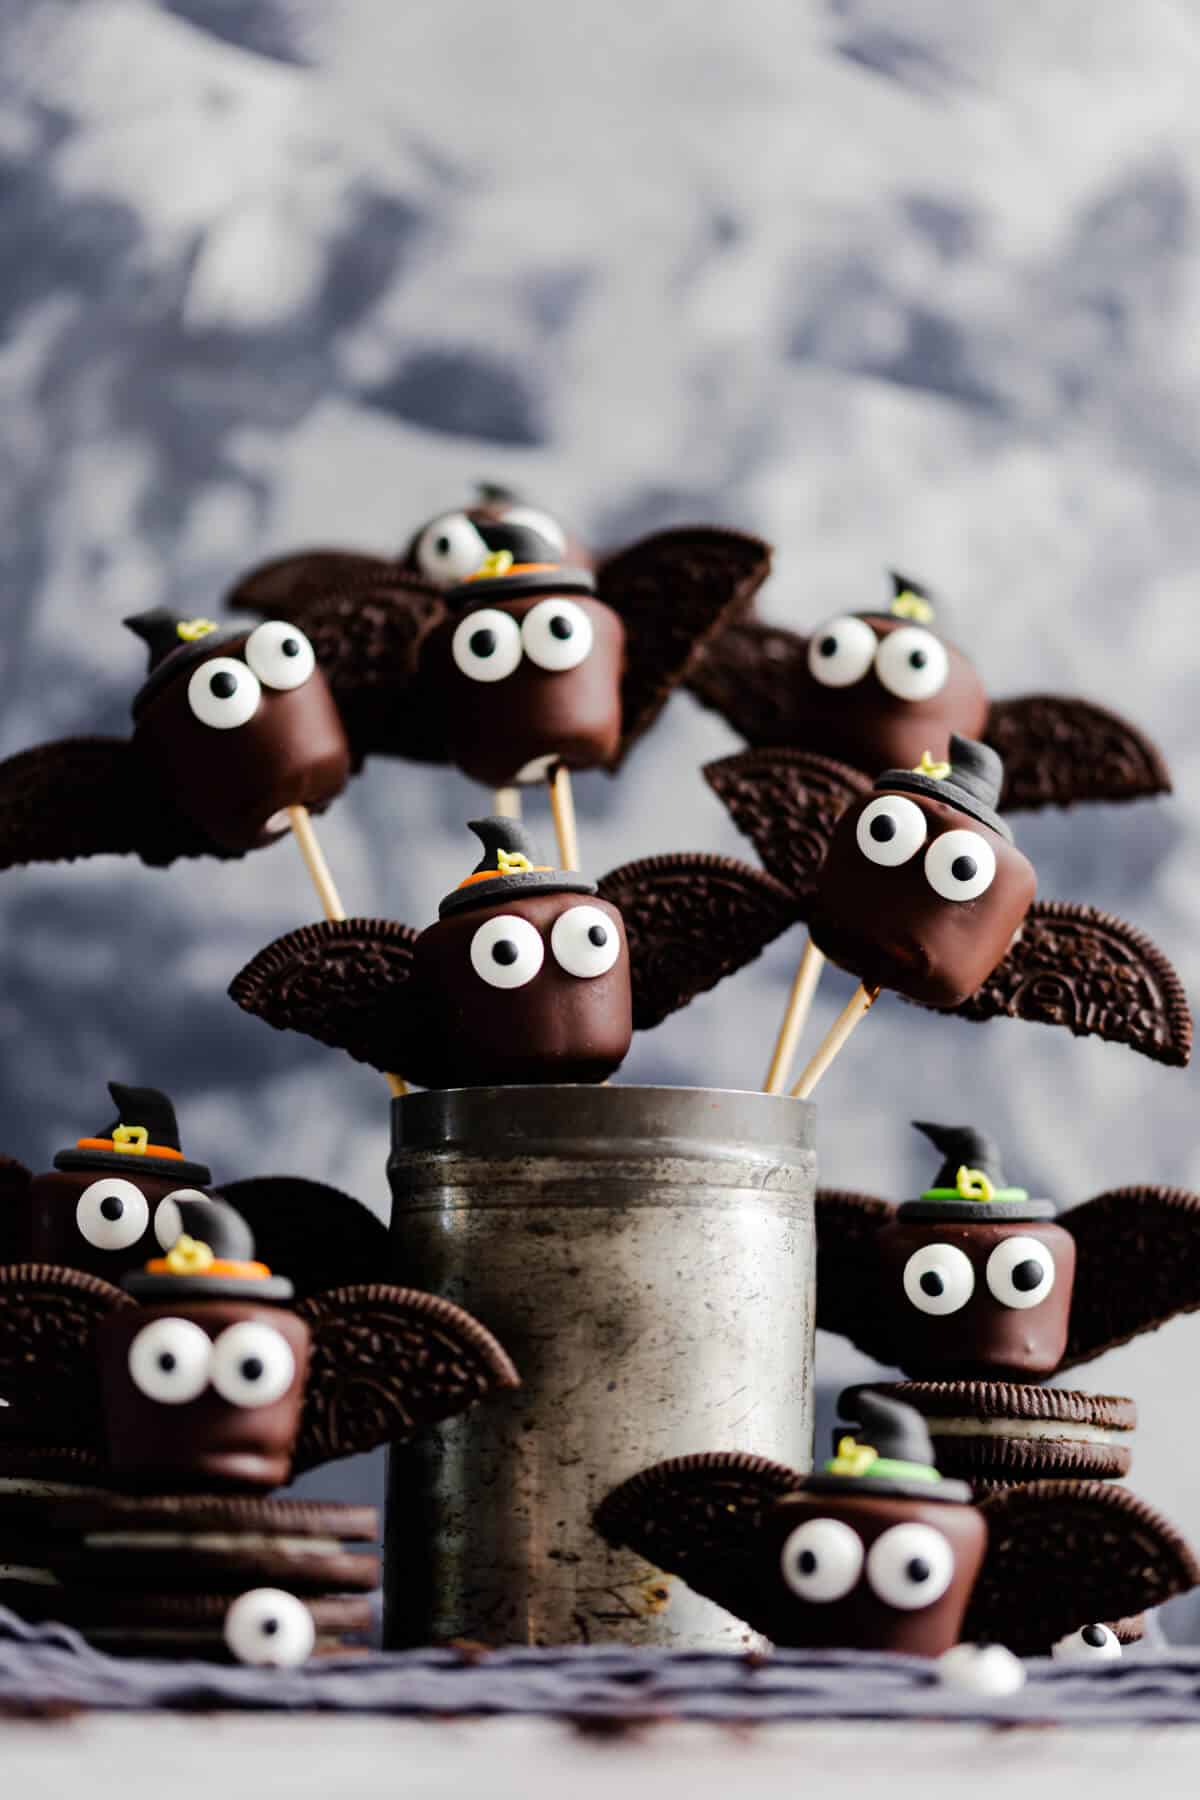 straight ahead shot at little chocolate marshmallow bats wearing witches hats